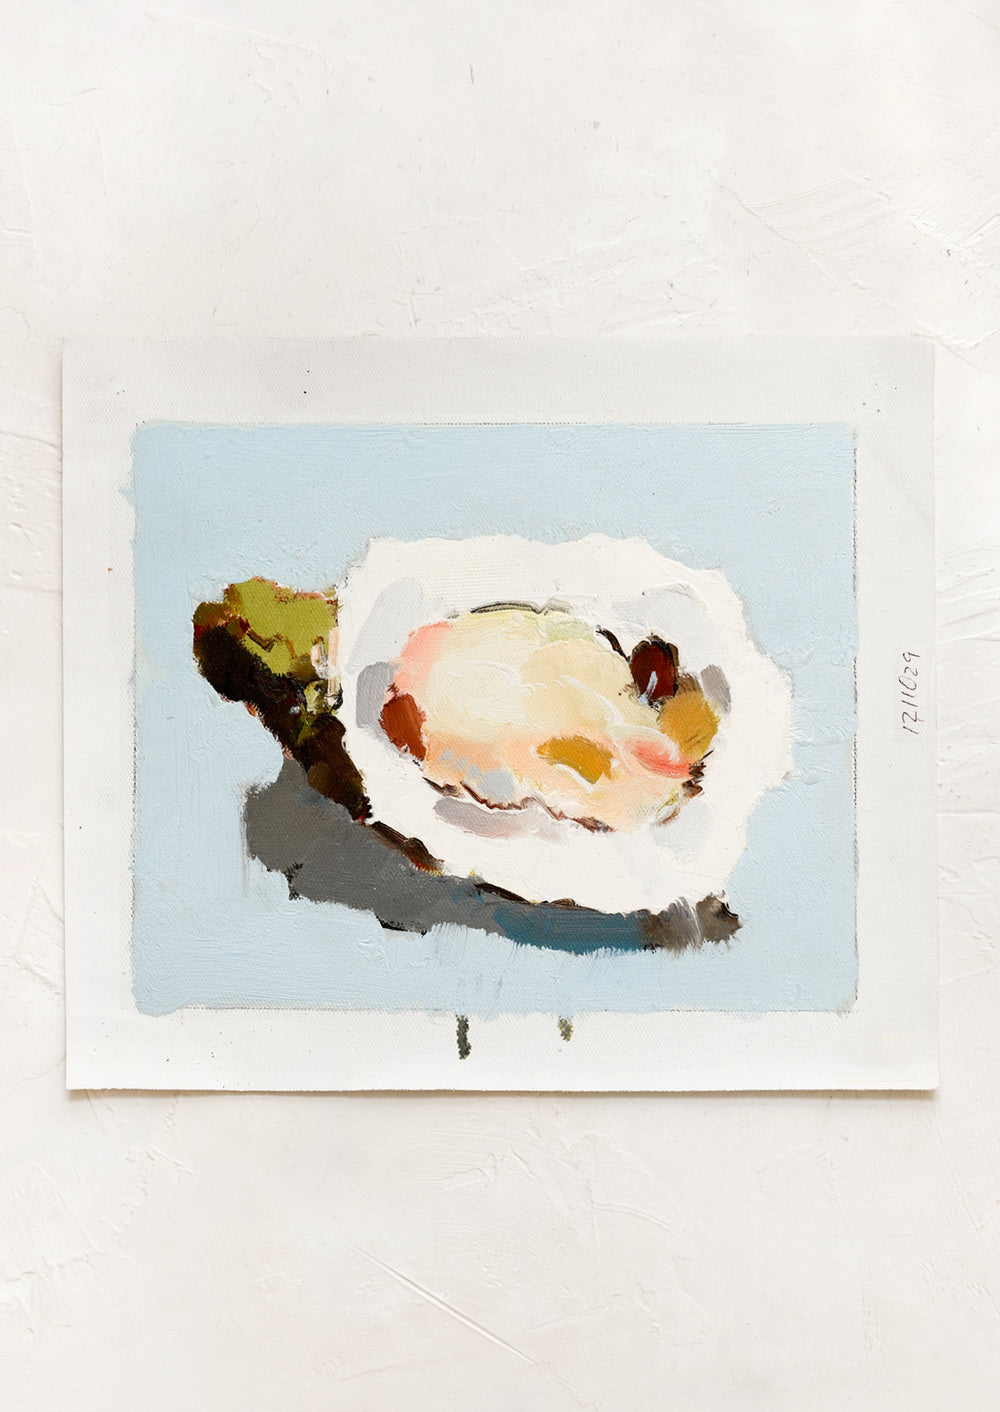 An original oyster still life painting on blue background.